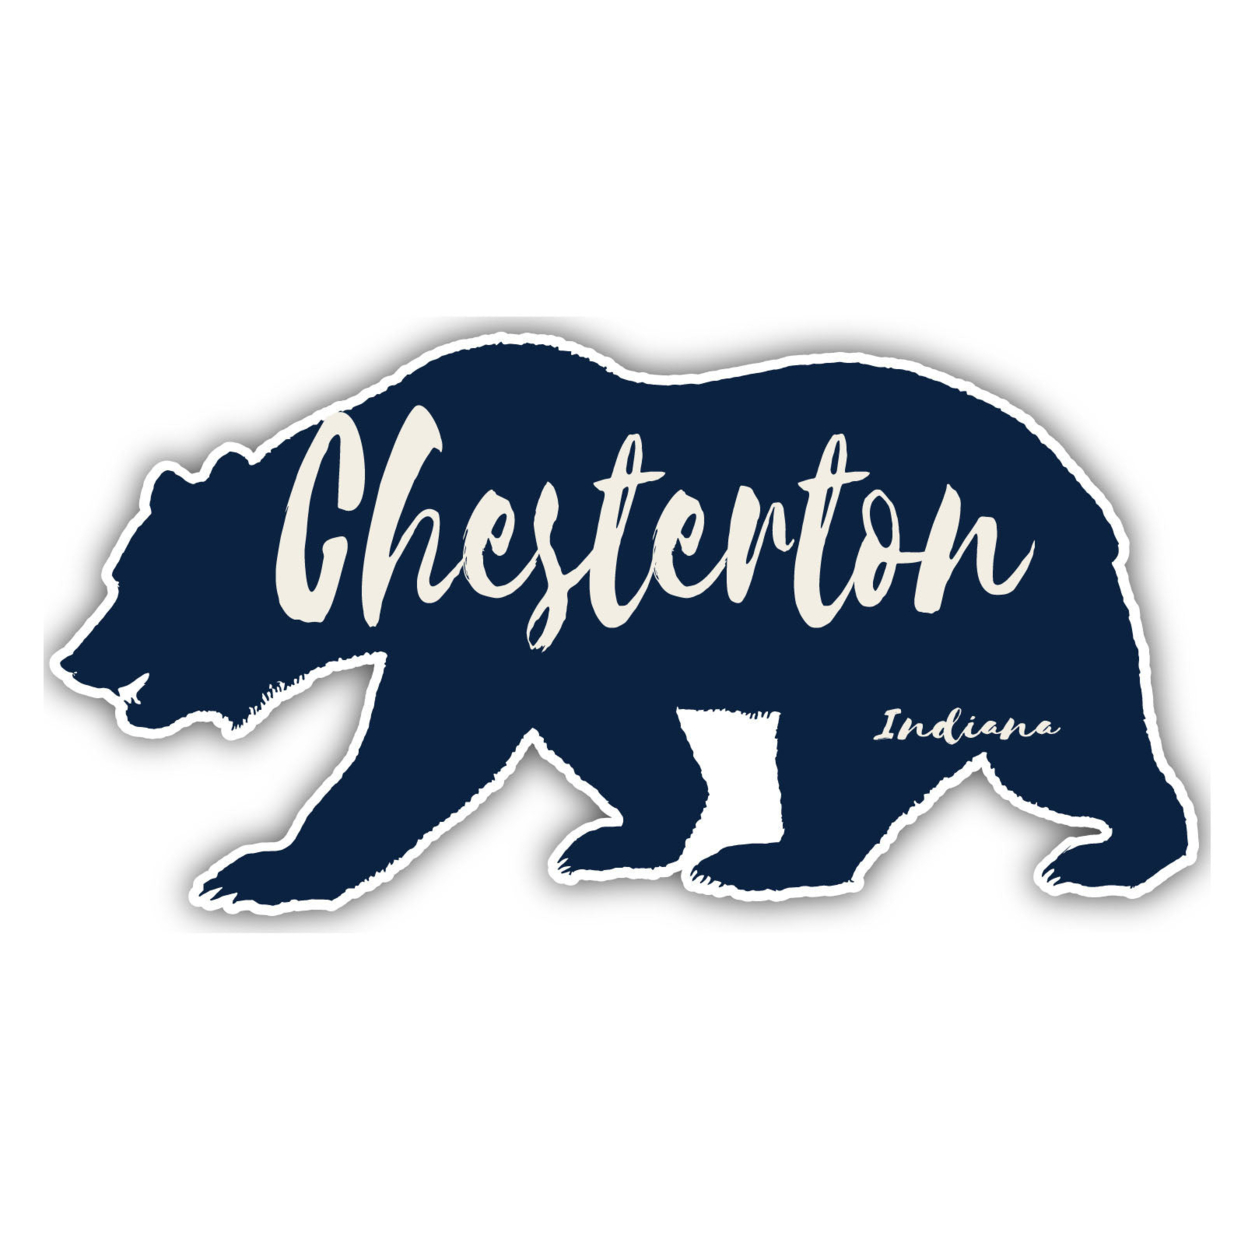 Chesterton Indiana Souvenir Decorative Stickers (Choose Theme And Size) - 4-Pack, 12-Inch, Bear